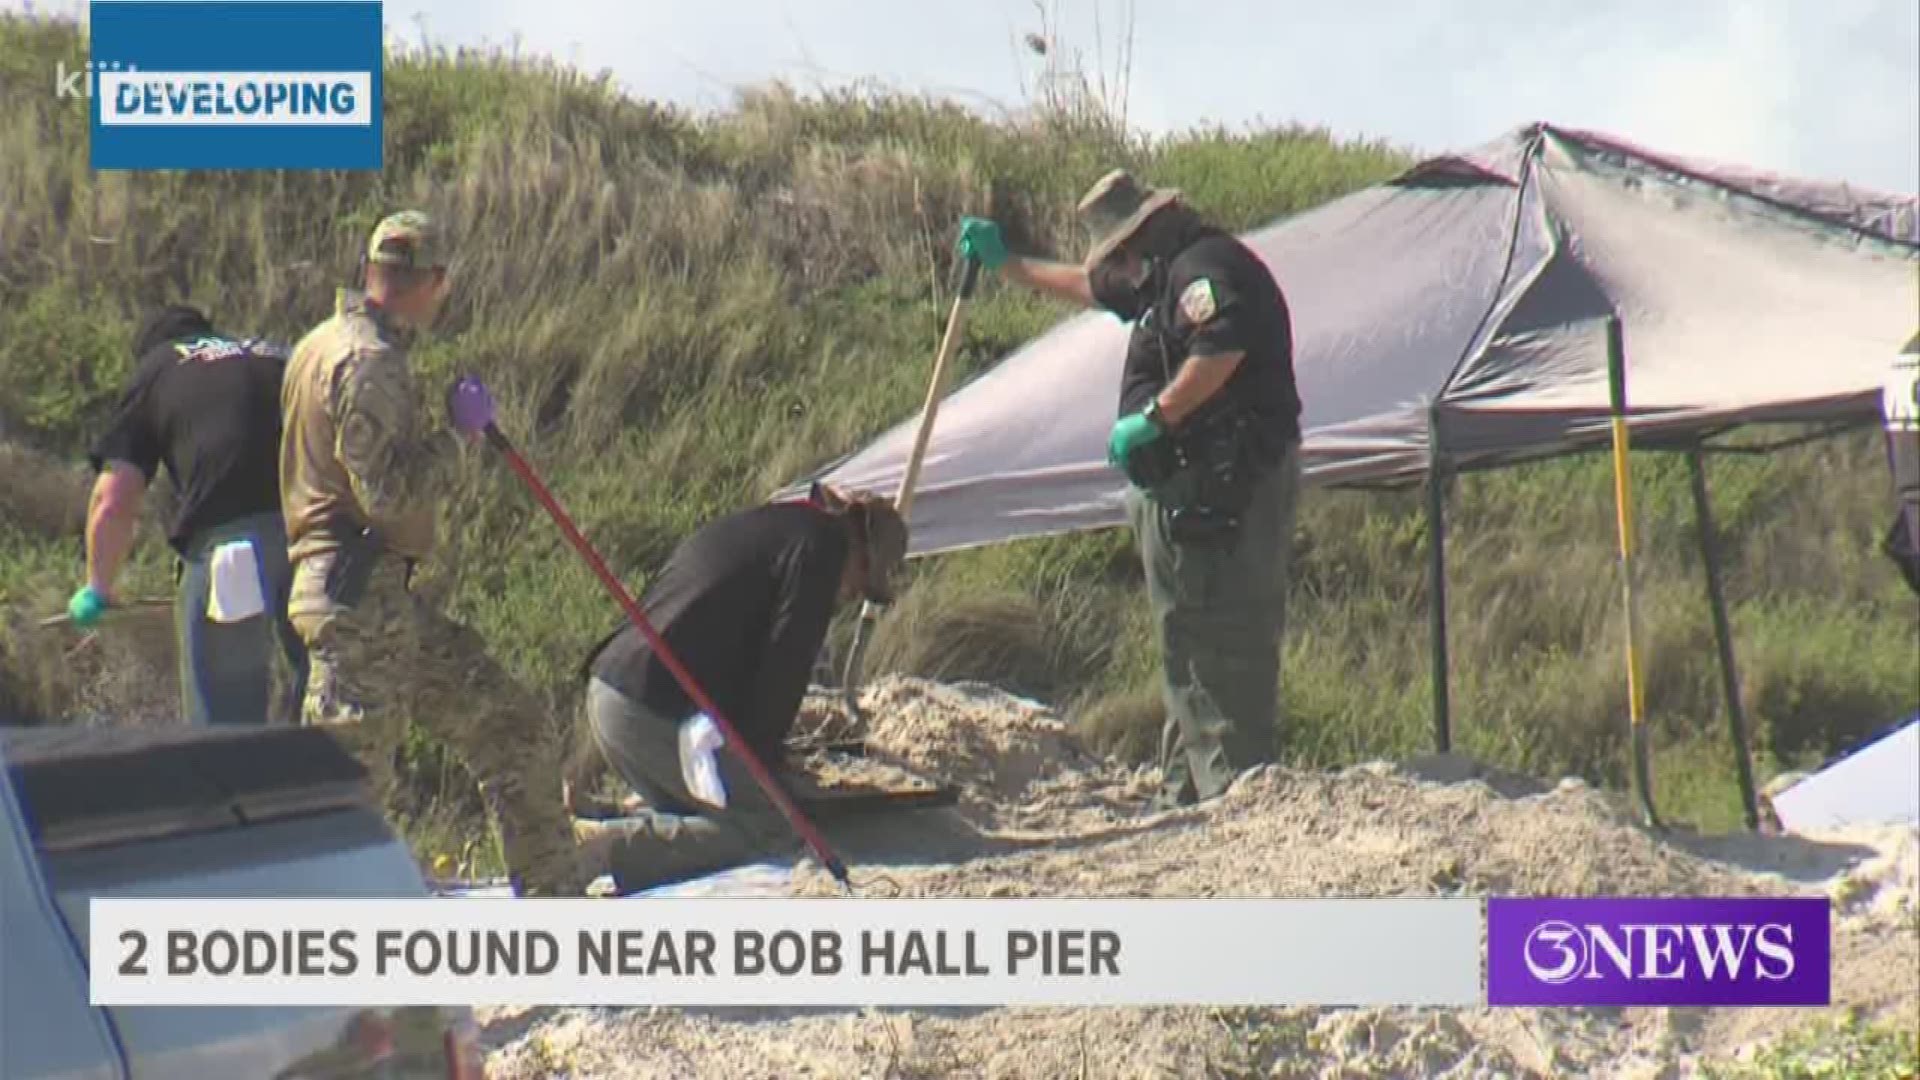 A gruesome discovery was made in an area known as the "Bowl" just south of Bob Hall Pier Sunday night, according to Kleberg County Chief Deputy Jaime Garza.